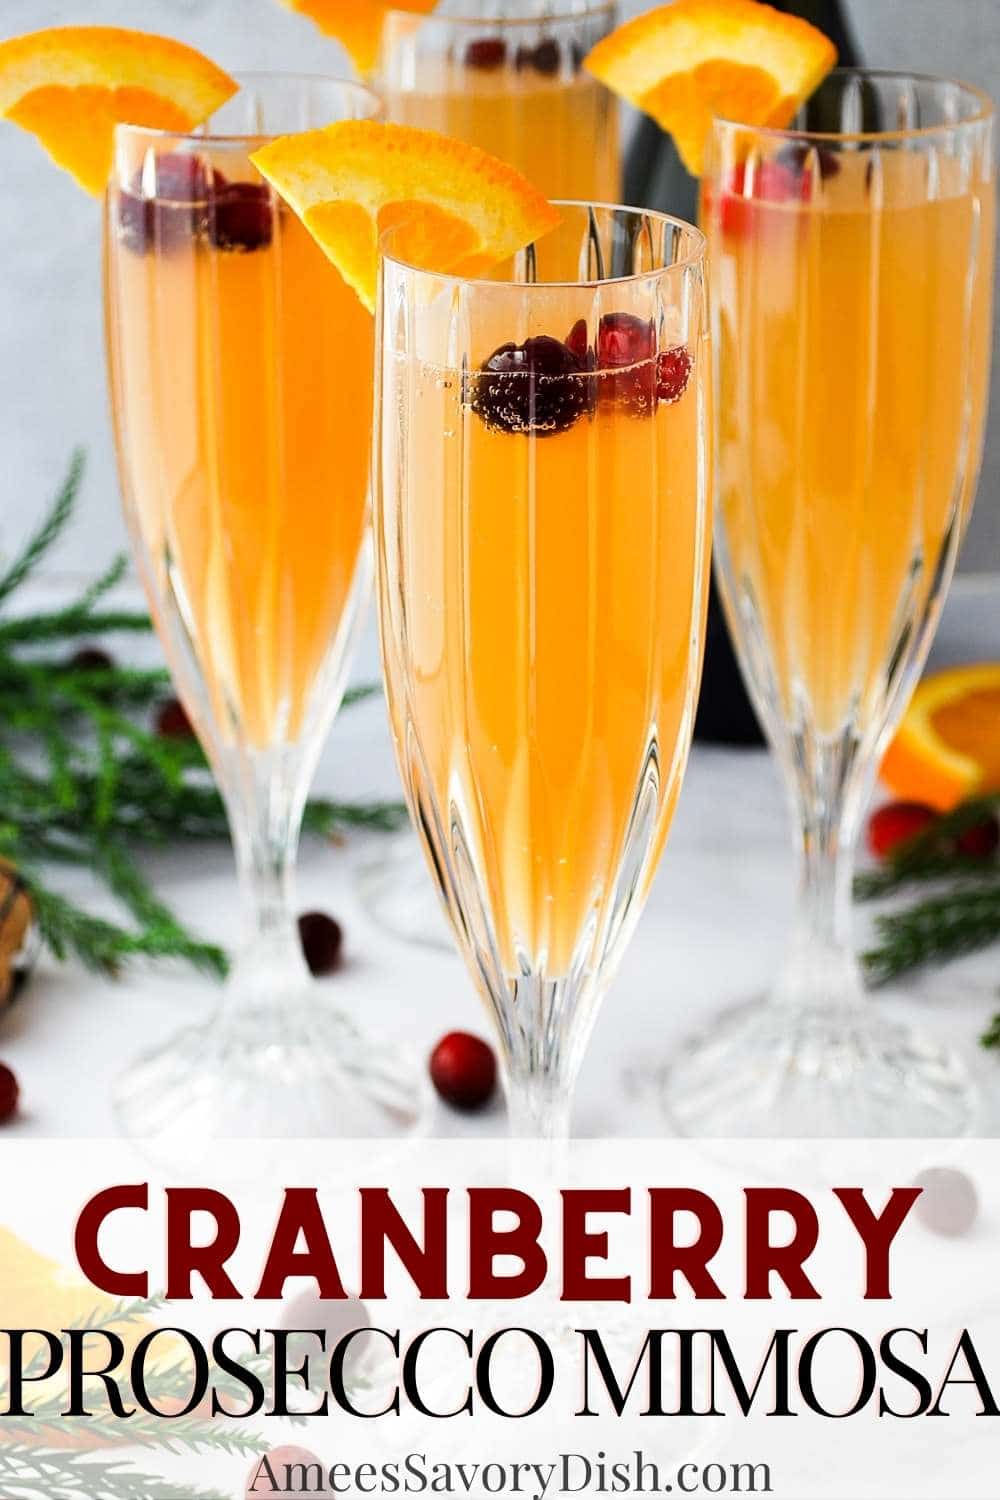 This Cranberry Prosecco Mimosa is a fun and festive libation, perfect for the holiday season, made with Prosecco wine and accents of cranberry and orange. via @Ameessavorydish